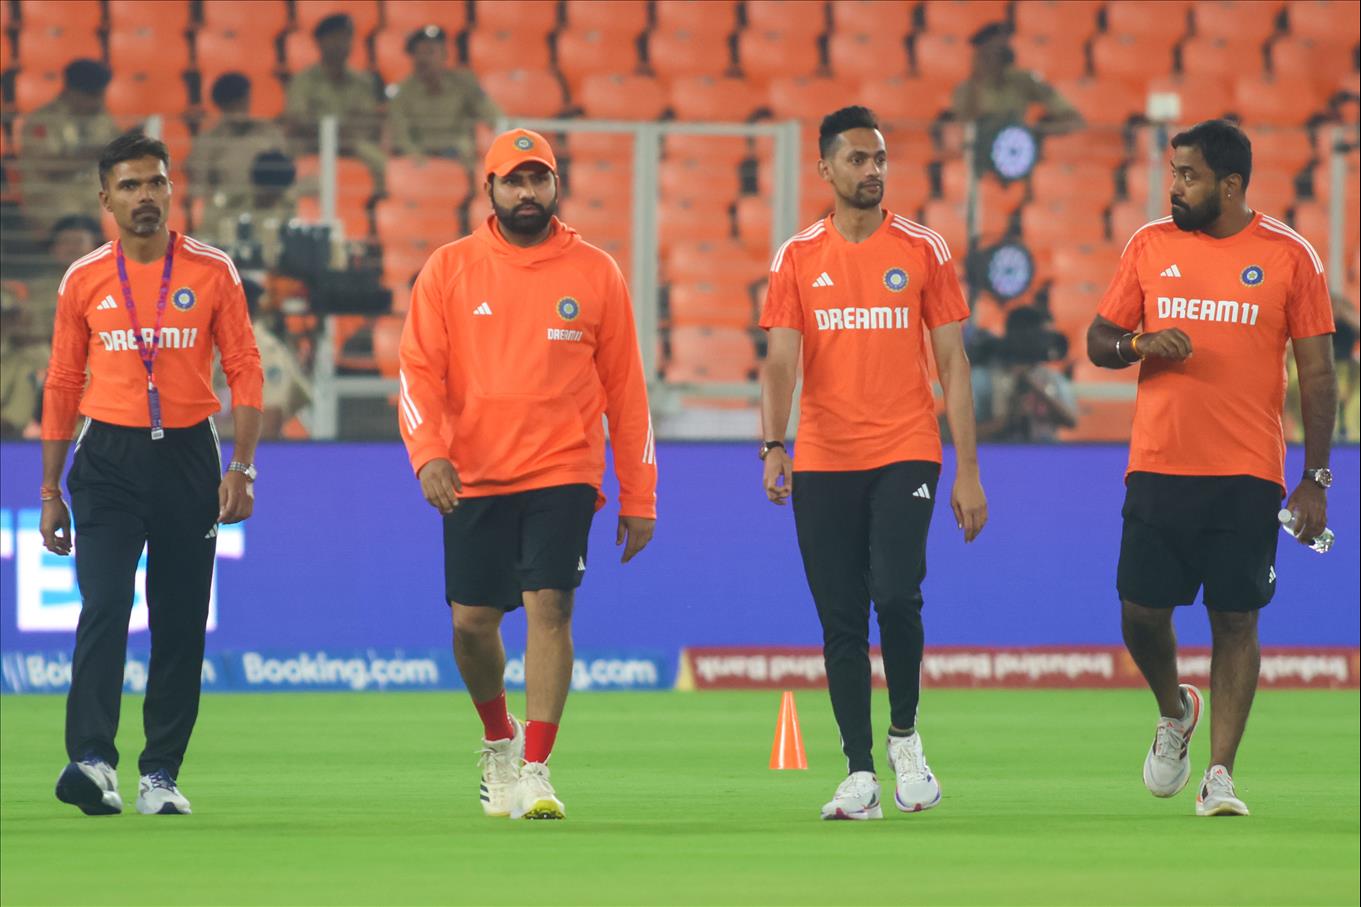 Indian Cricketers Whose World Cup Journey May End Soon Post Ahmedabad-Debacle